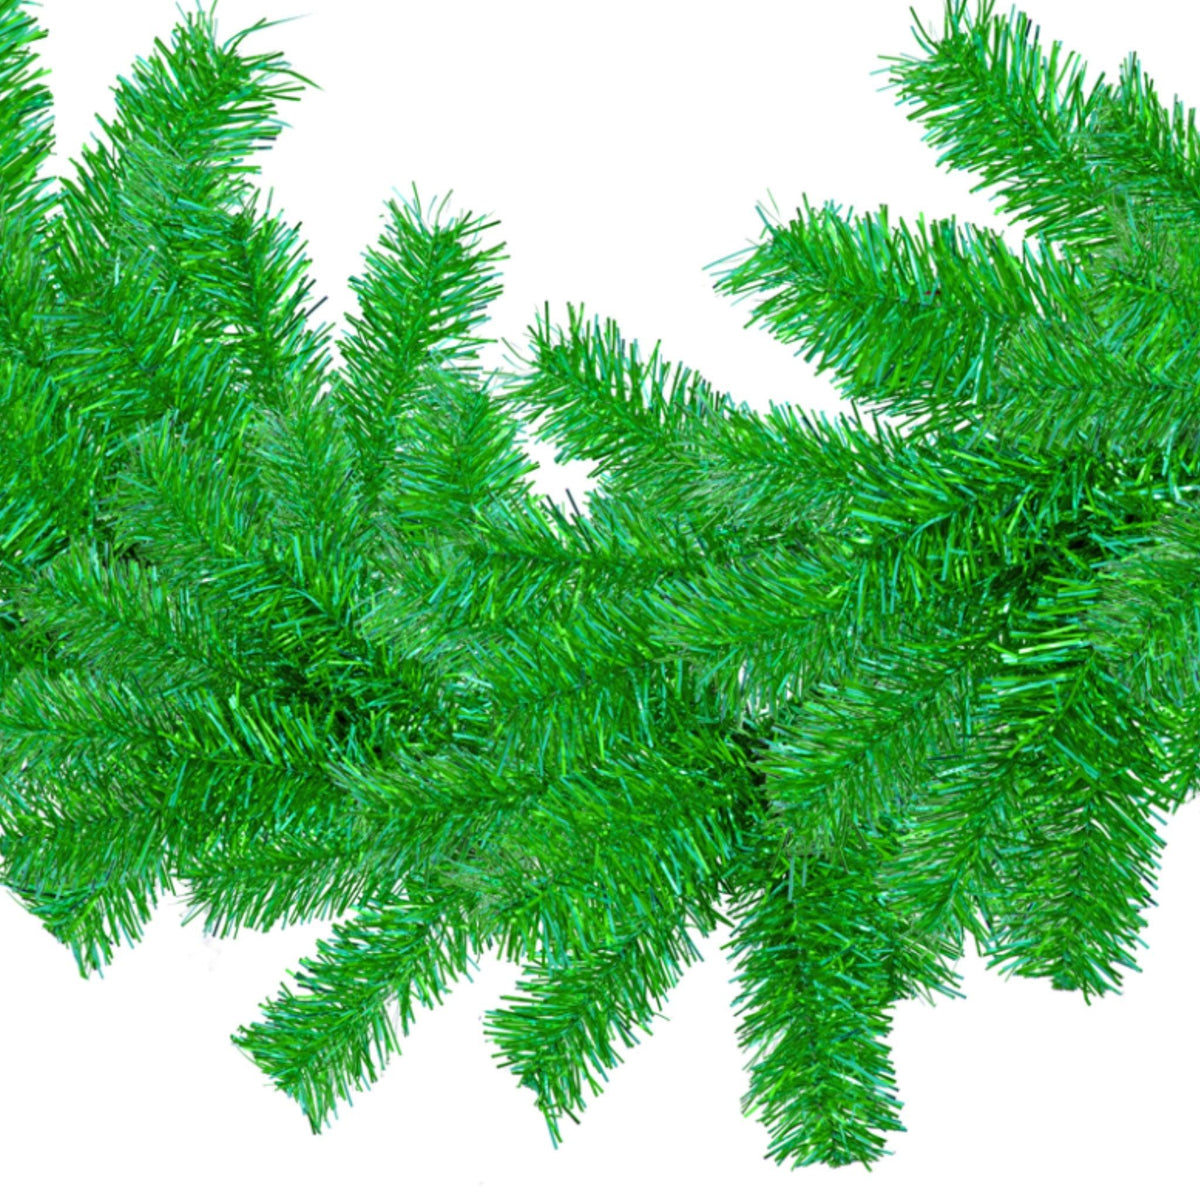 Shop for Lee Display's brand new 6FT Metallic Green Tinsel Brush Garlands on sale now at leedisplay.com.  Photo of middle section